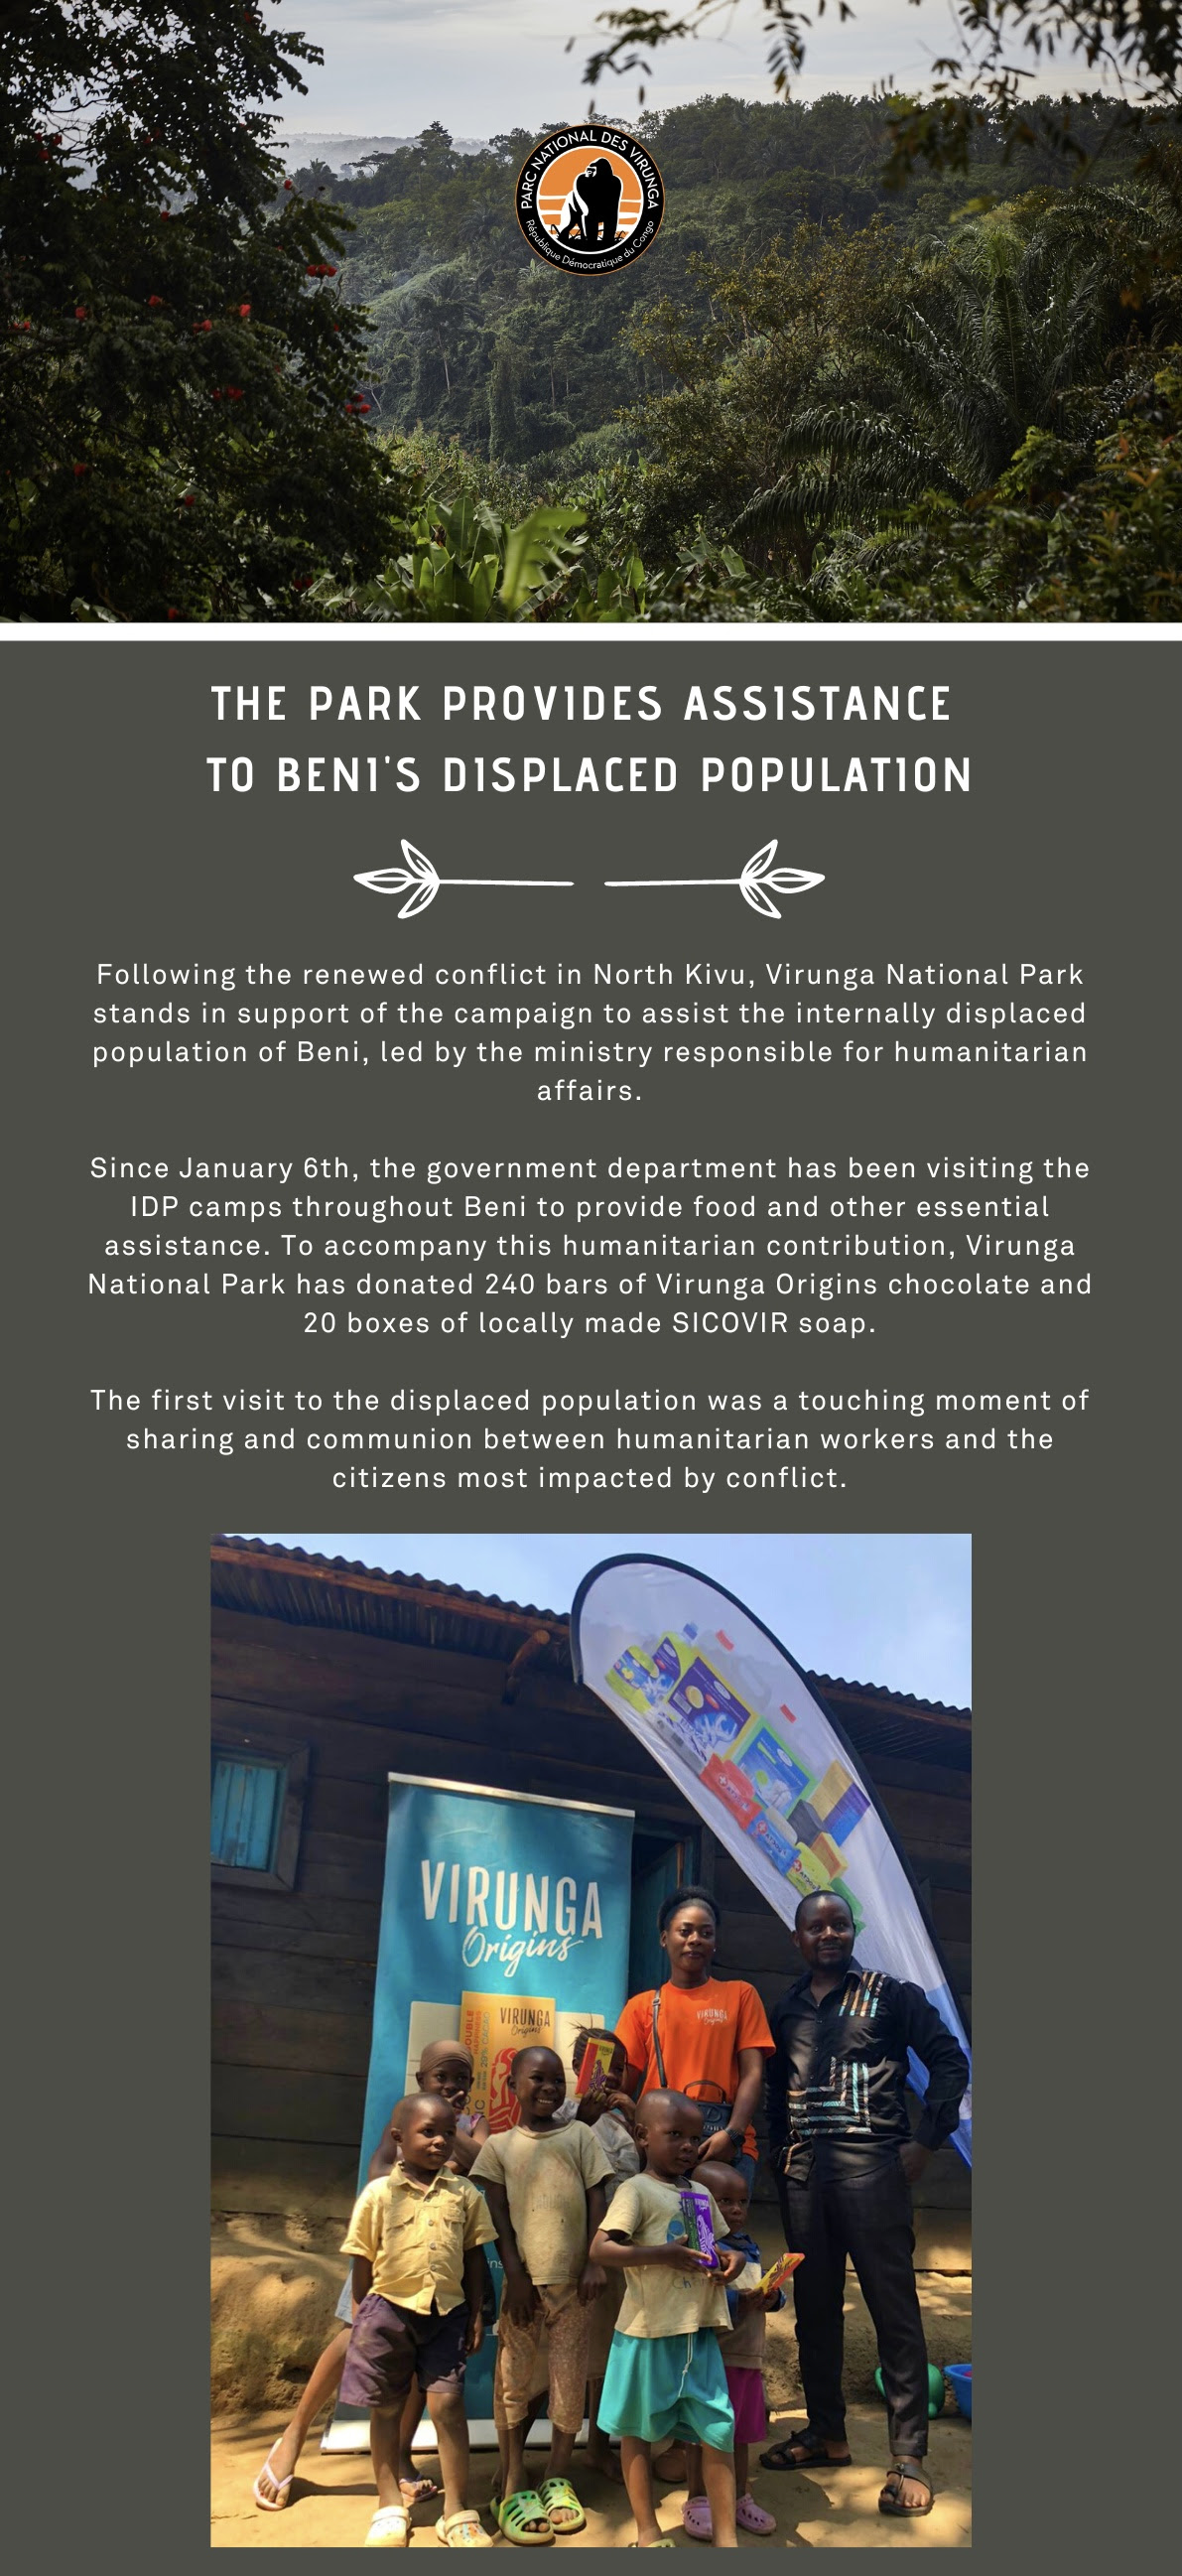 Following the renewed conflict in North Kivu, Virunga National Park stands in support of the campaign to assist the internally displaced population of Beni, led by the ministry responsible for humanitarian affairs.